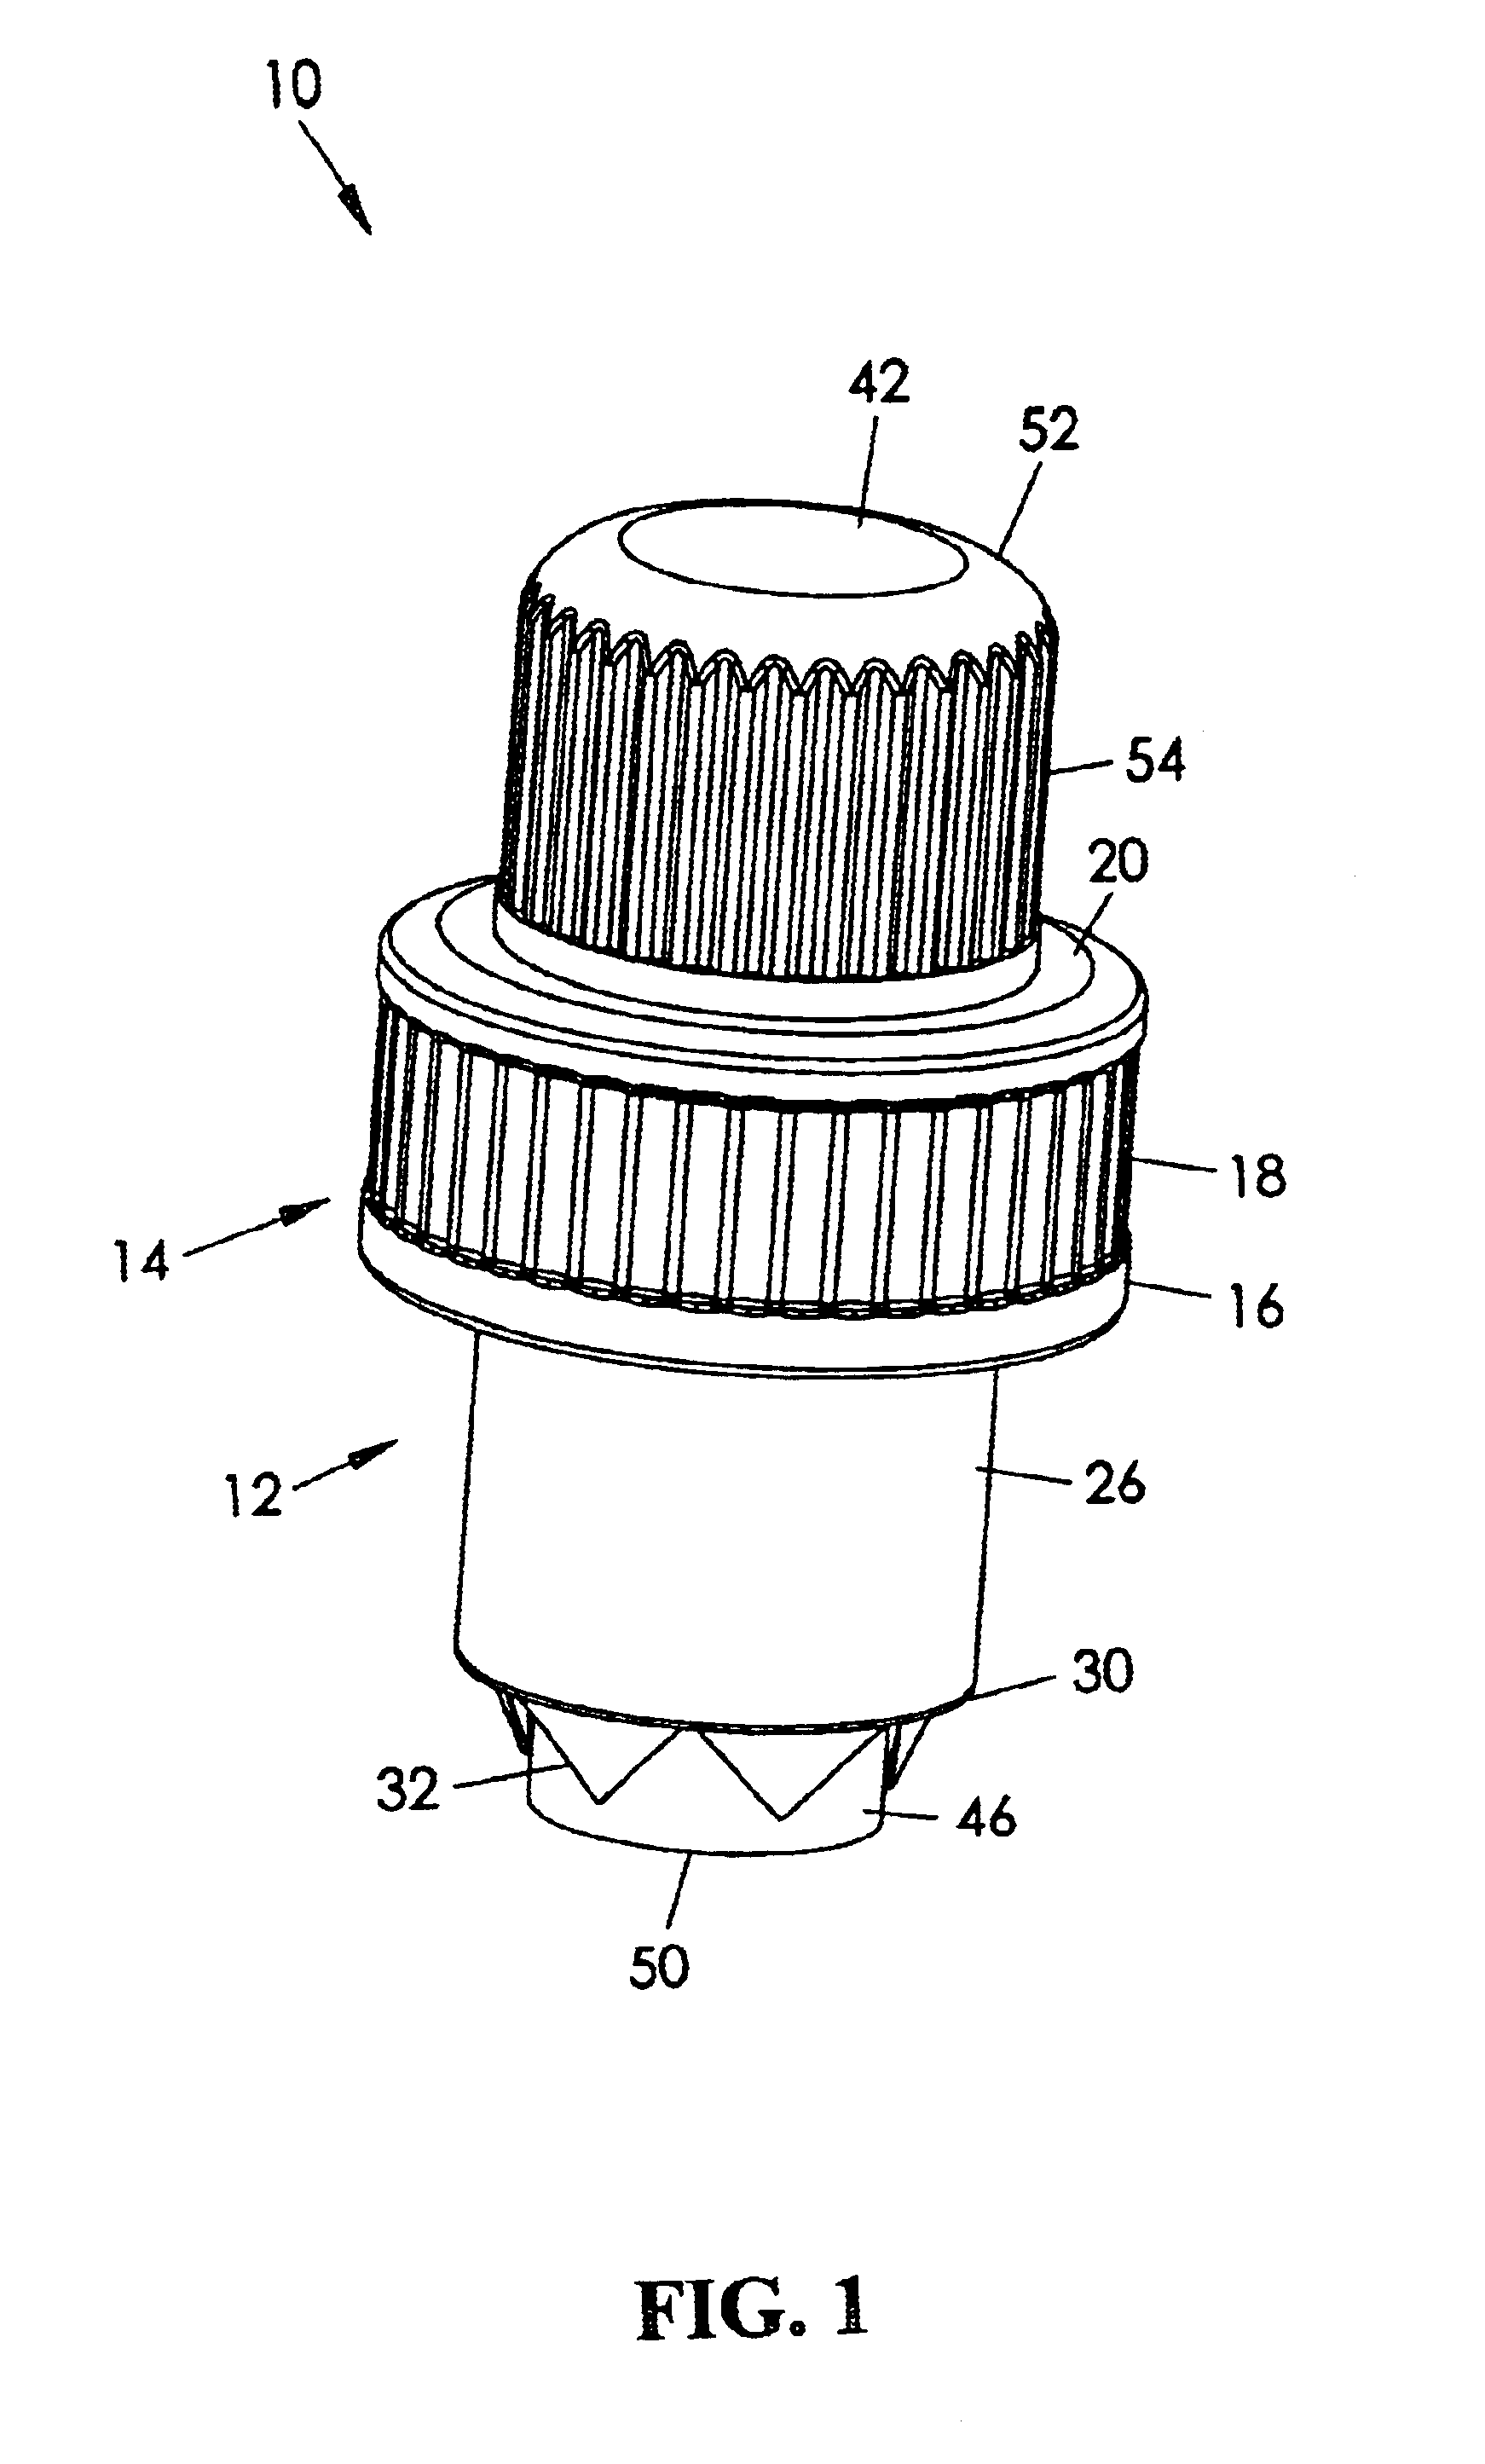 Beverage storage and discharge cap assembly